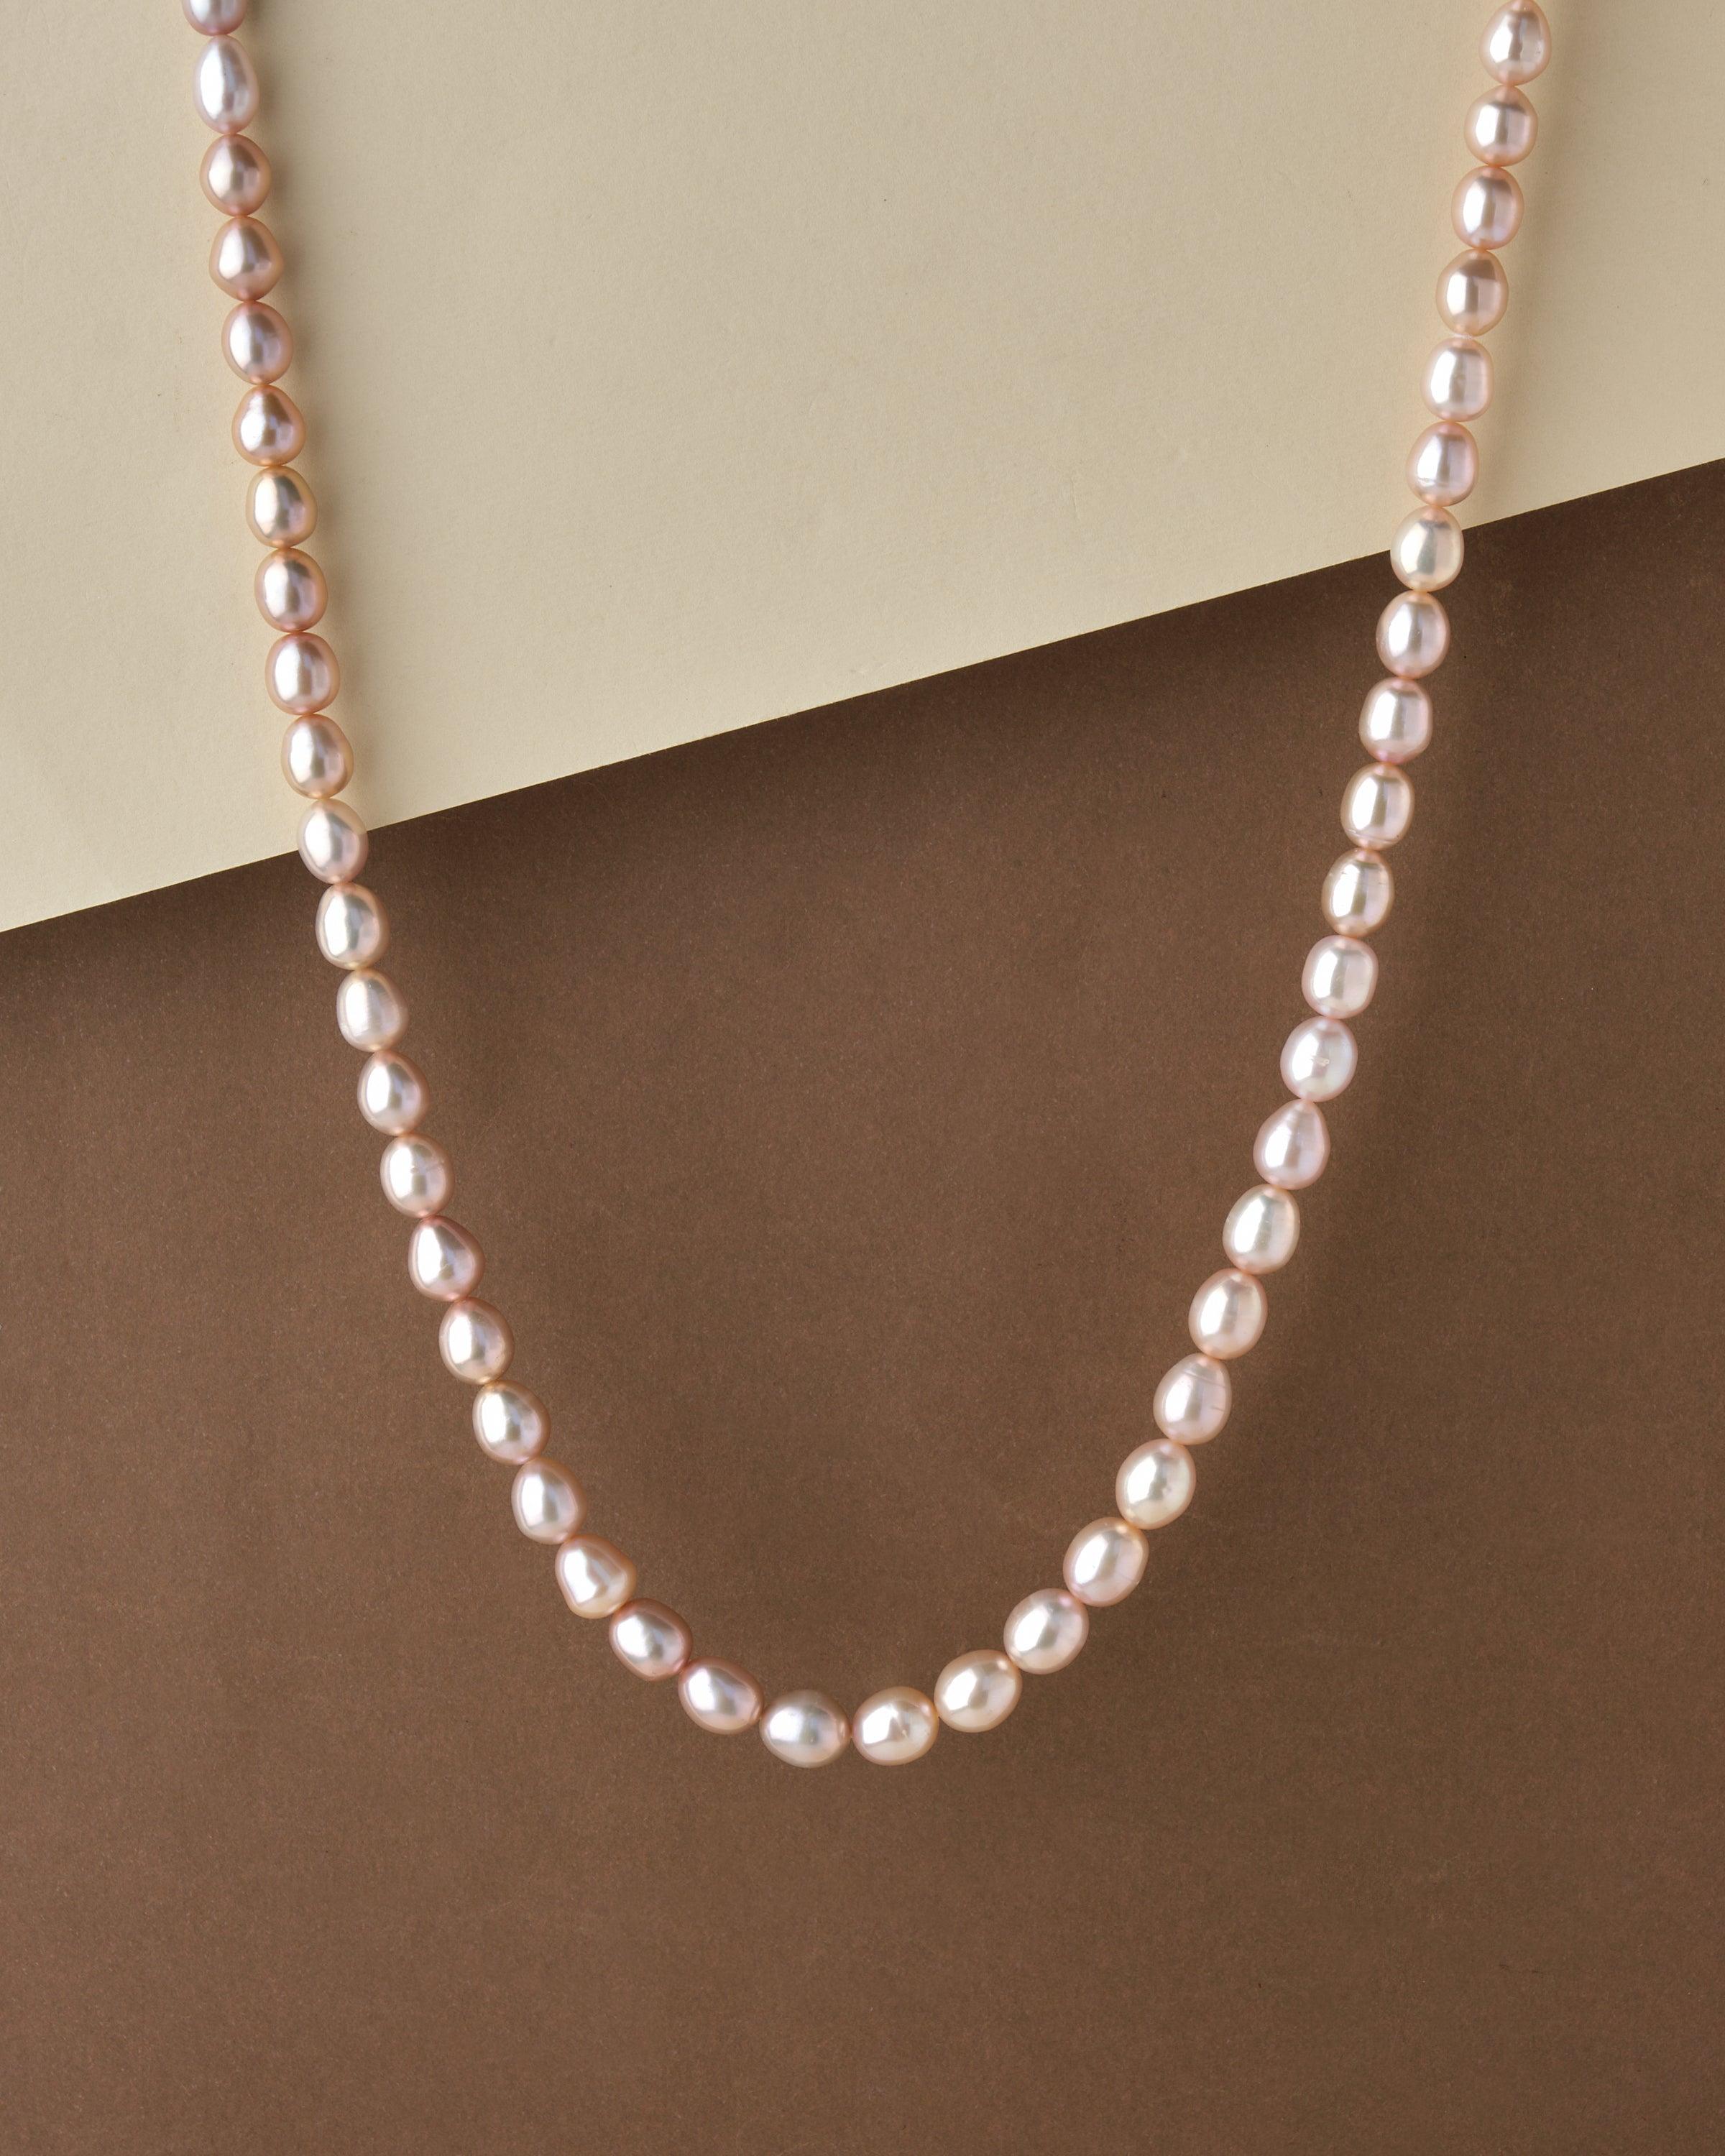 TEARDROP FRESHWATER PEARL NECKLACE- Sterling Silver - The Littl A$99.99  A$149.99 30off Bridal (Jewellery Only) Chain Necklace